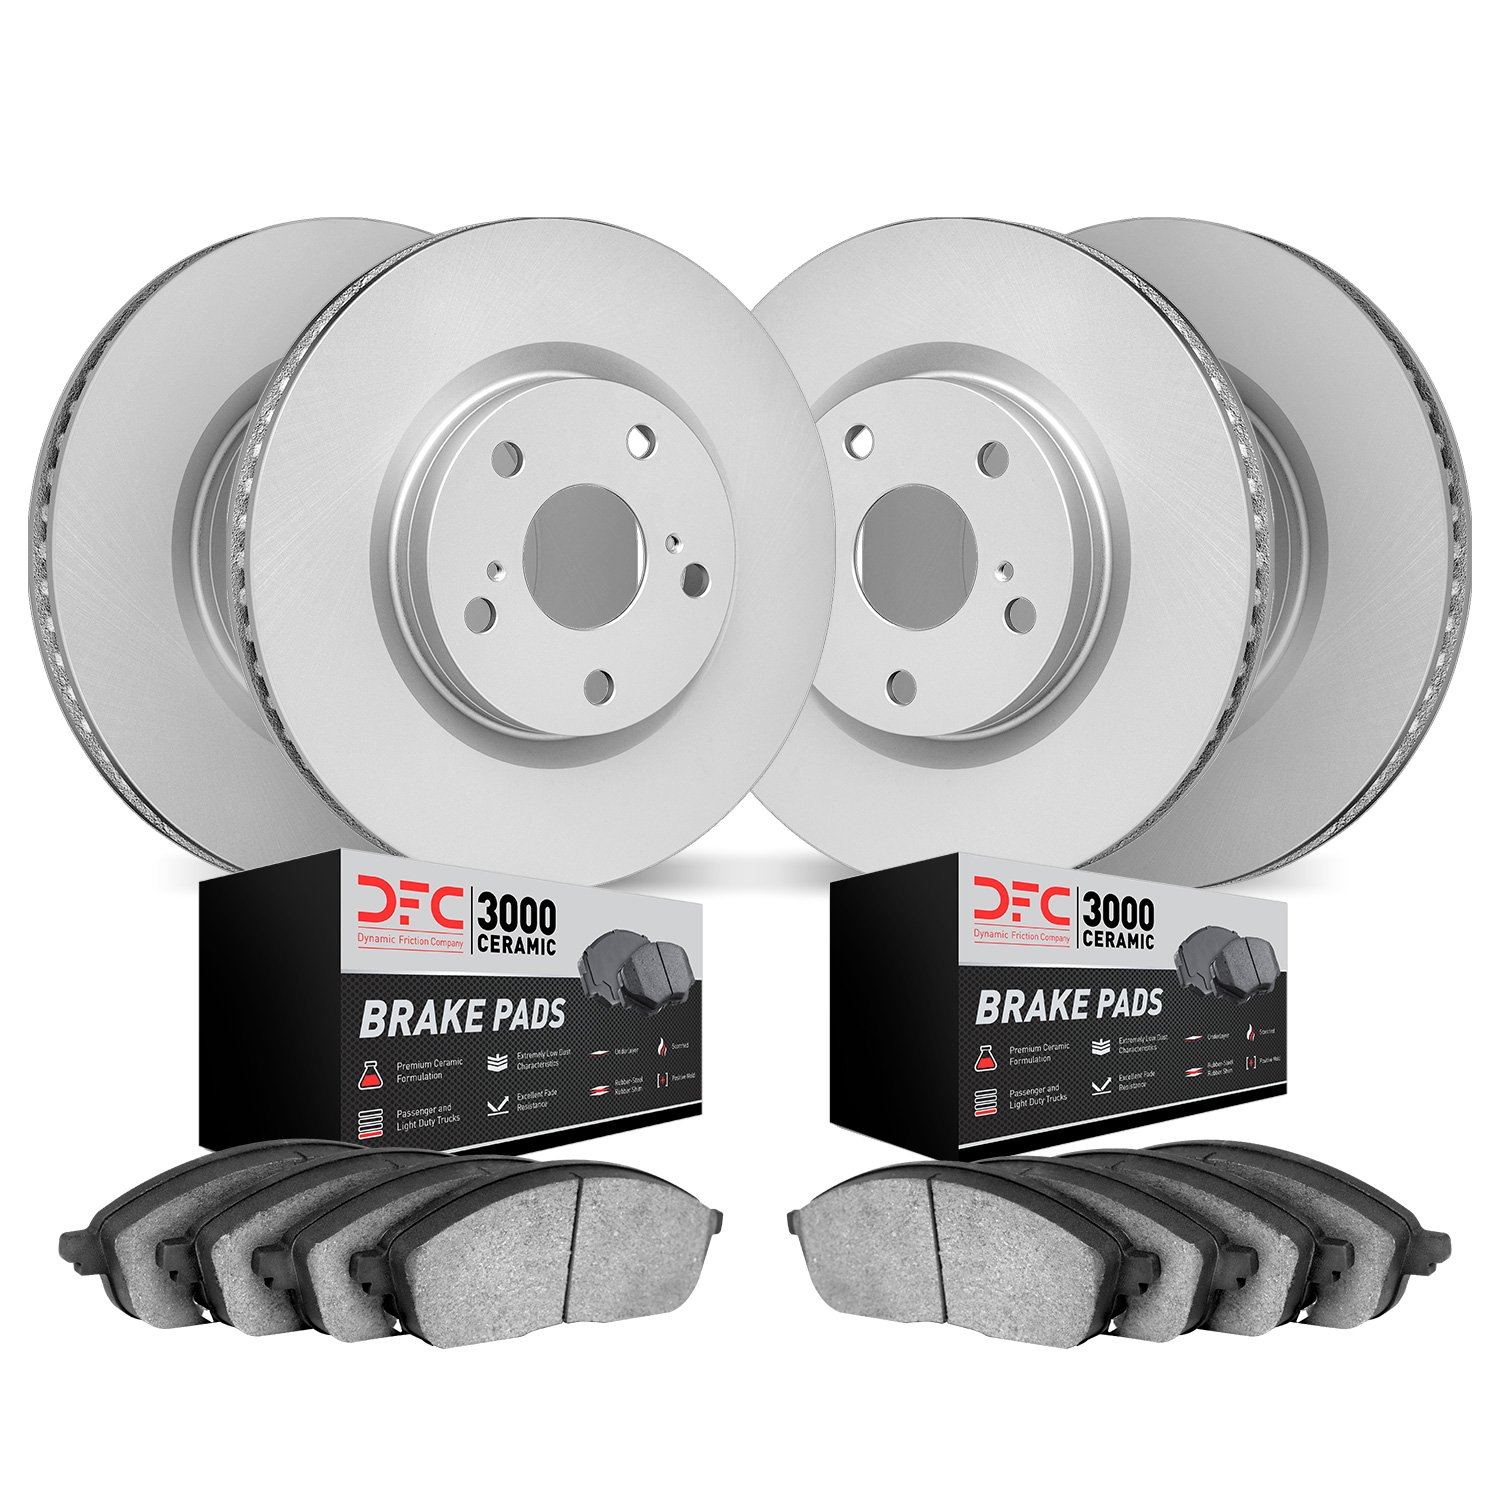 4304-31060 Geospec Brake Rotors with 3000-Series Ceramic Brake Pads Kit, 2011-2016 BMW, Position: Front and Rear